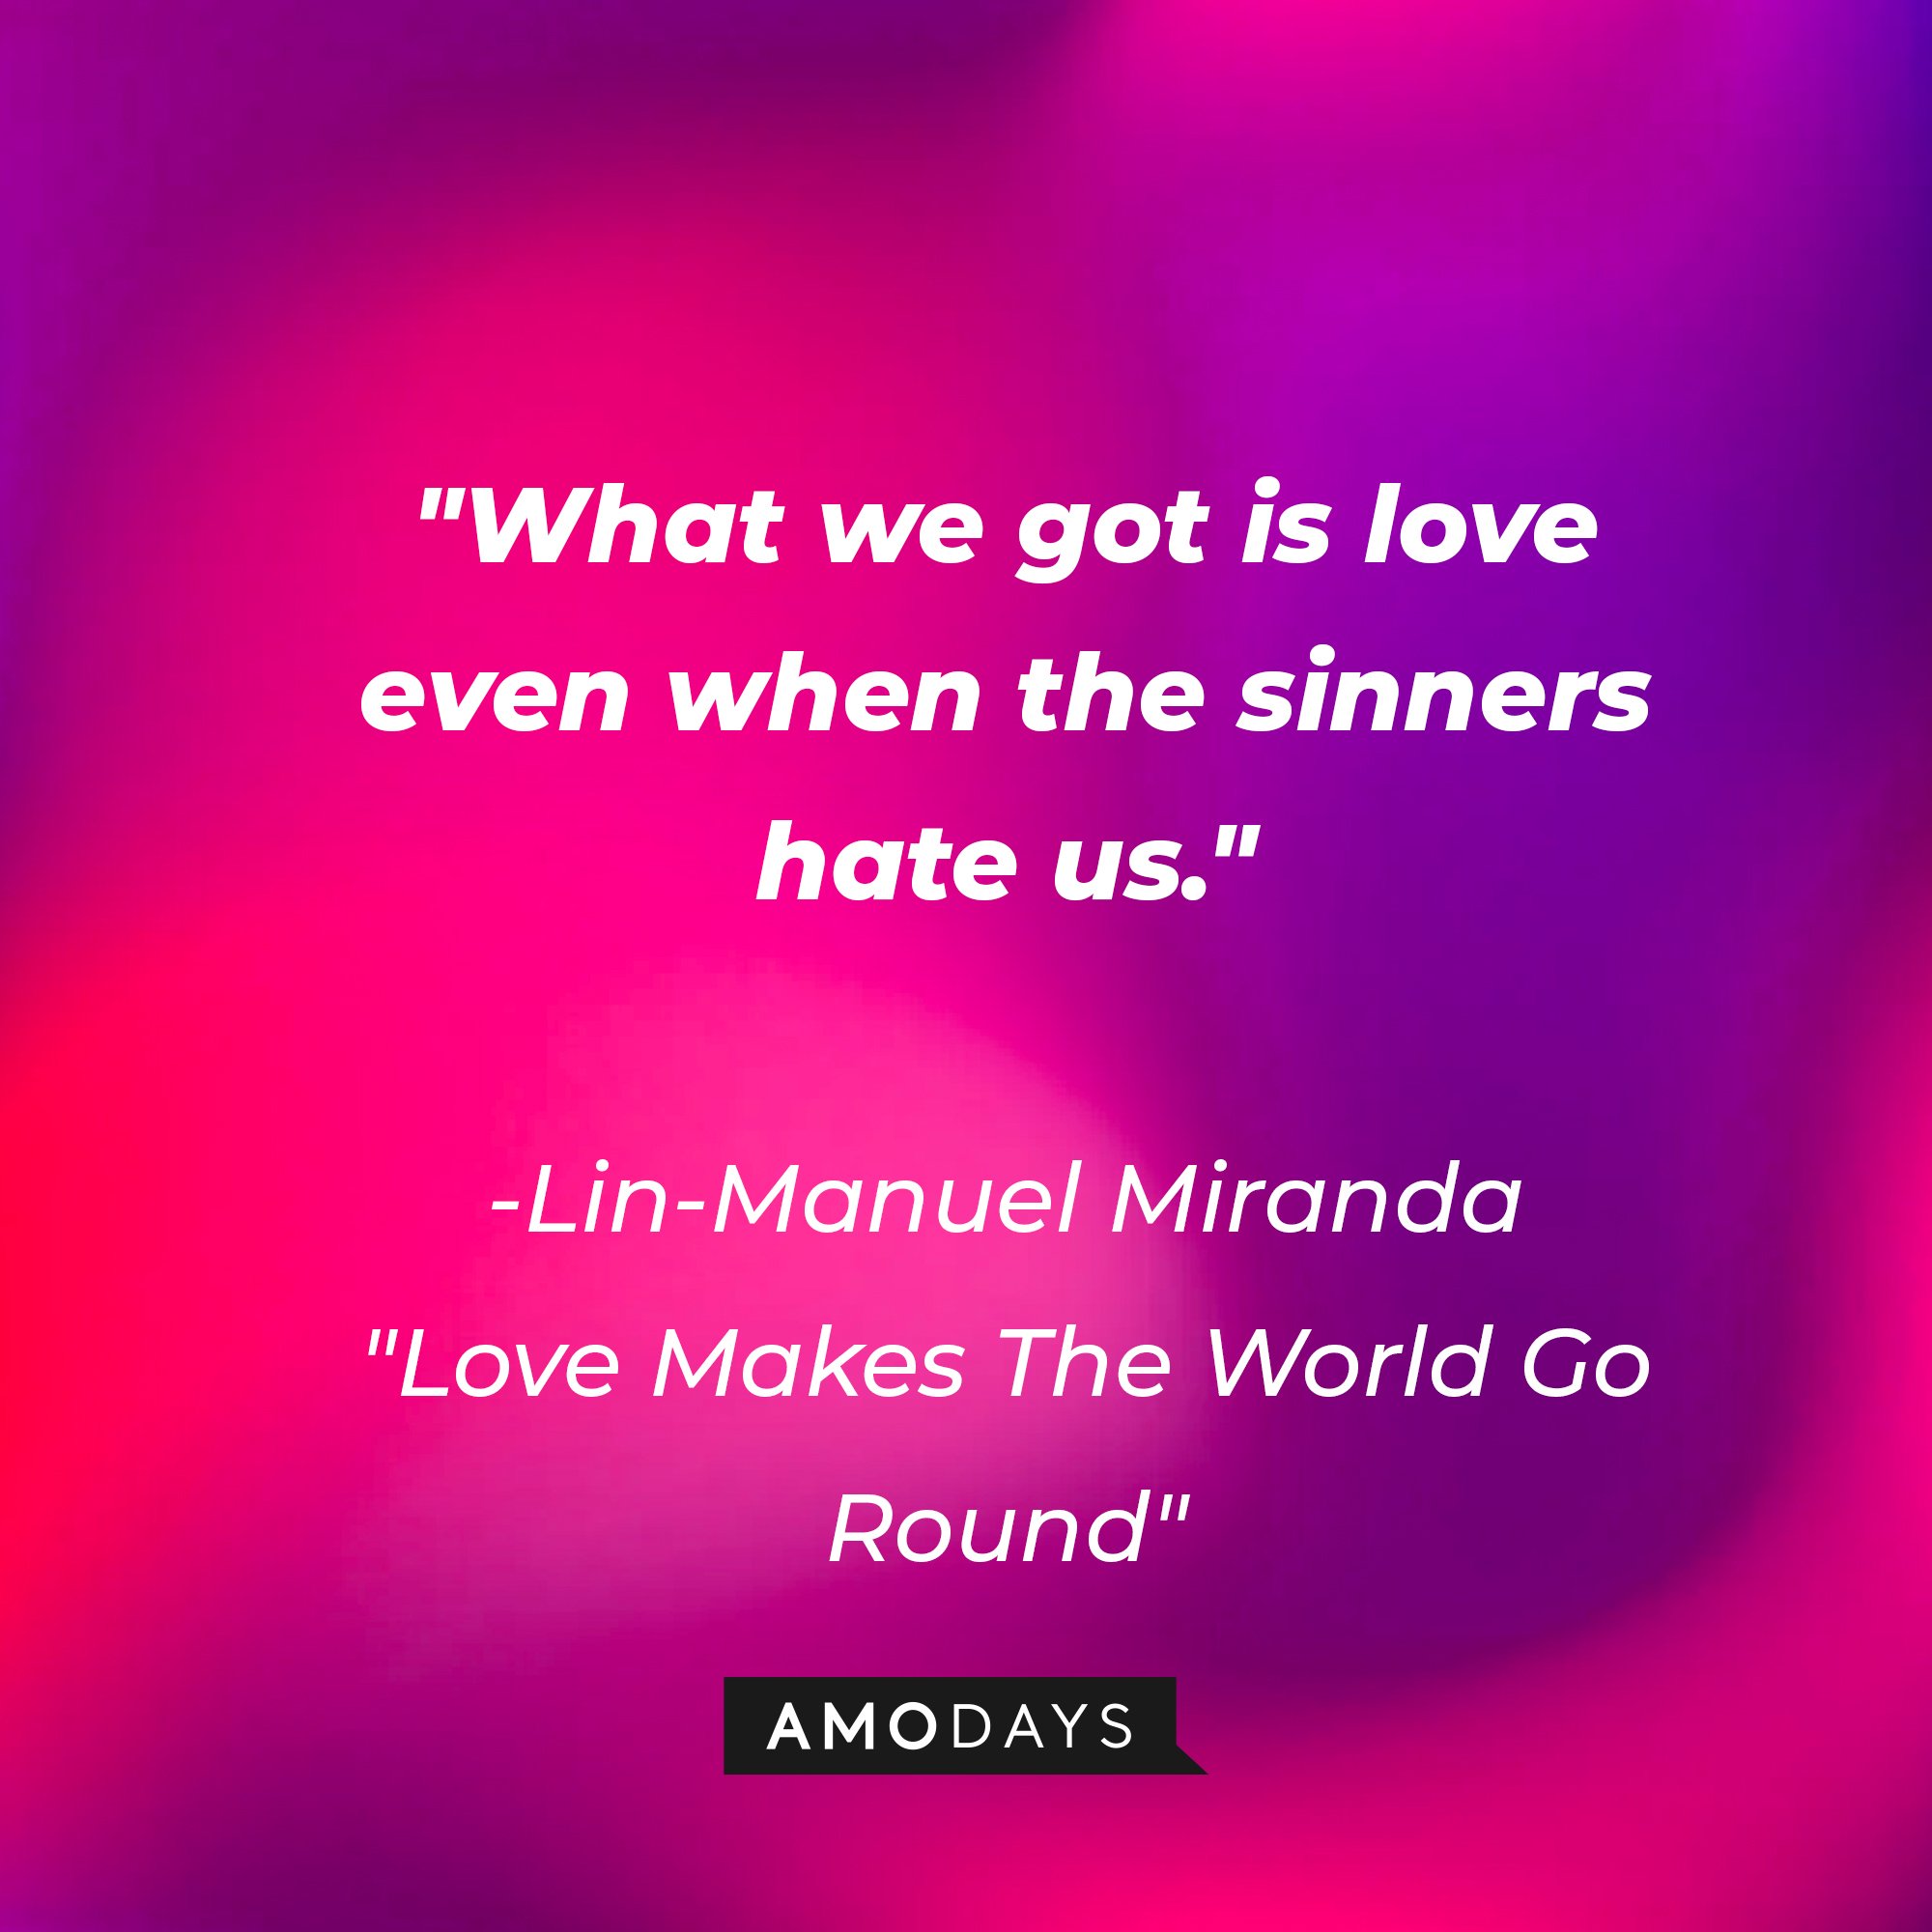 Lin-Manuel Miranda's "Love Makes the World Go Round" quote: What we got is love even when the sinners hate us." | Image: AmoDays